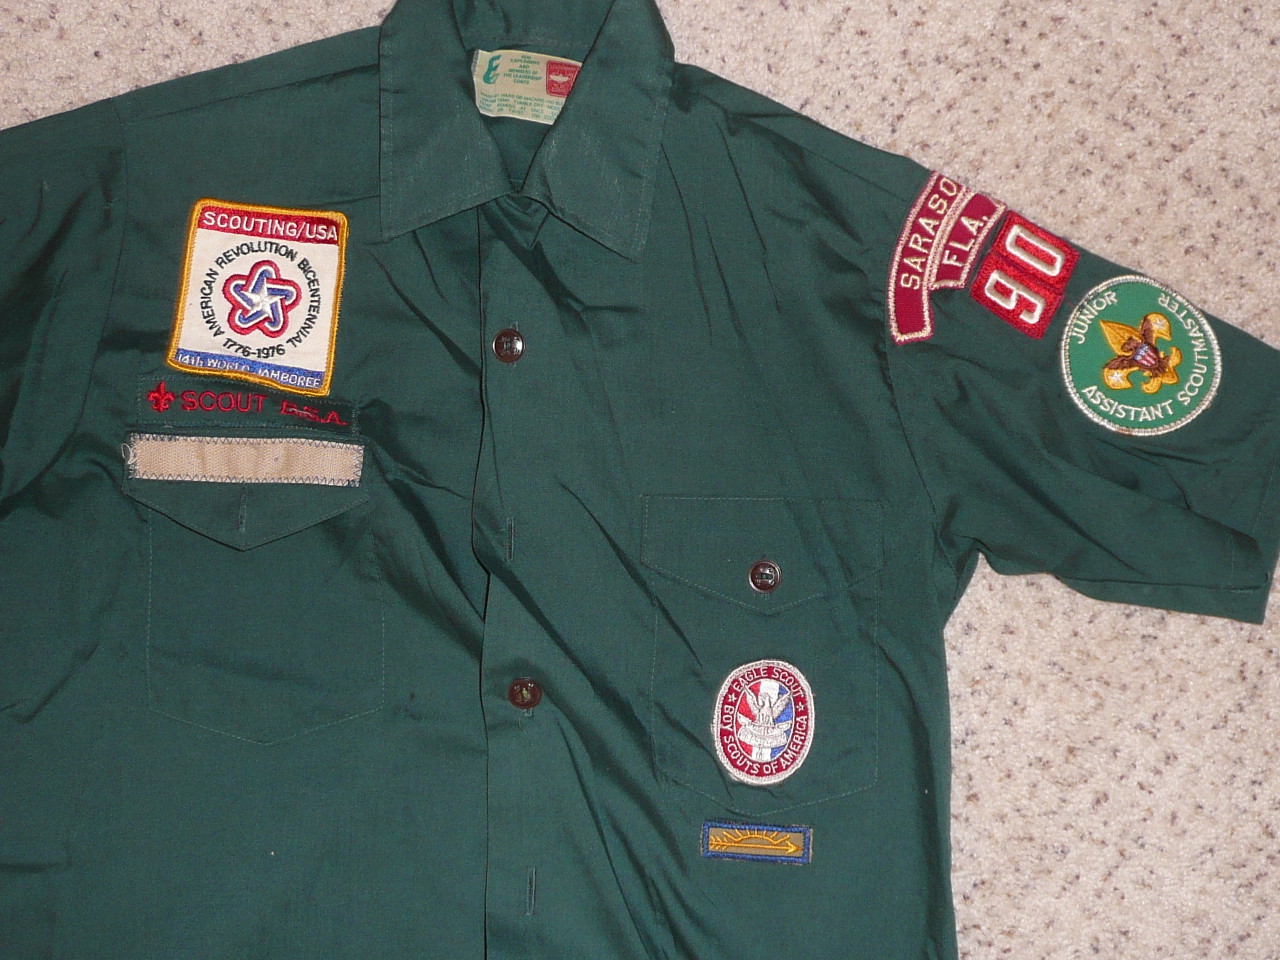 1970's Boy Scout Explorer Uniform Shirt with 1975 World Jamboree and Eagle from Sarasota FL, 19" chest 26" length, #FB99